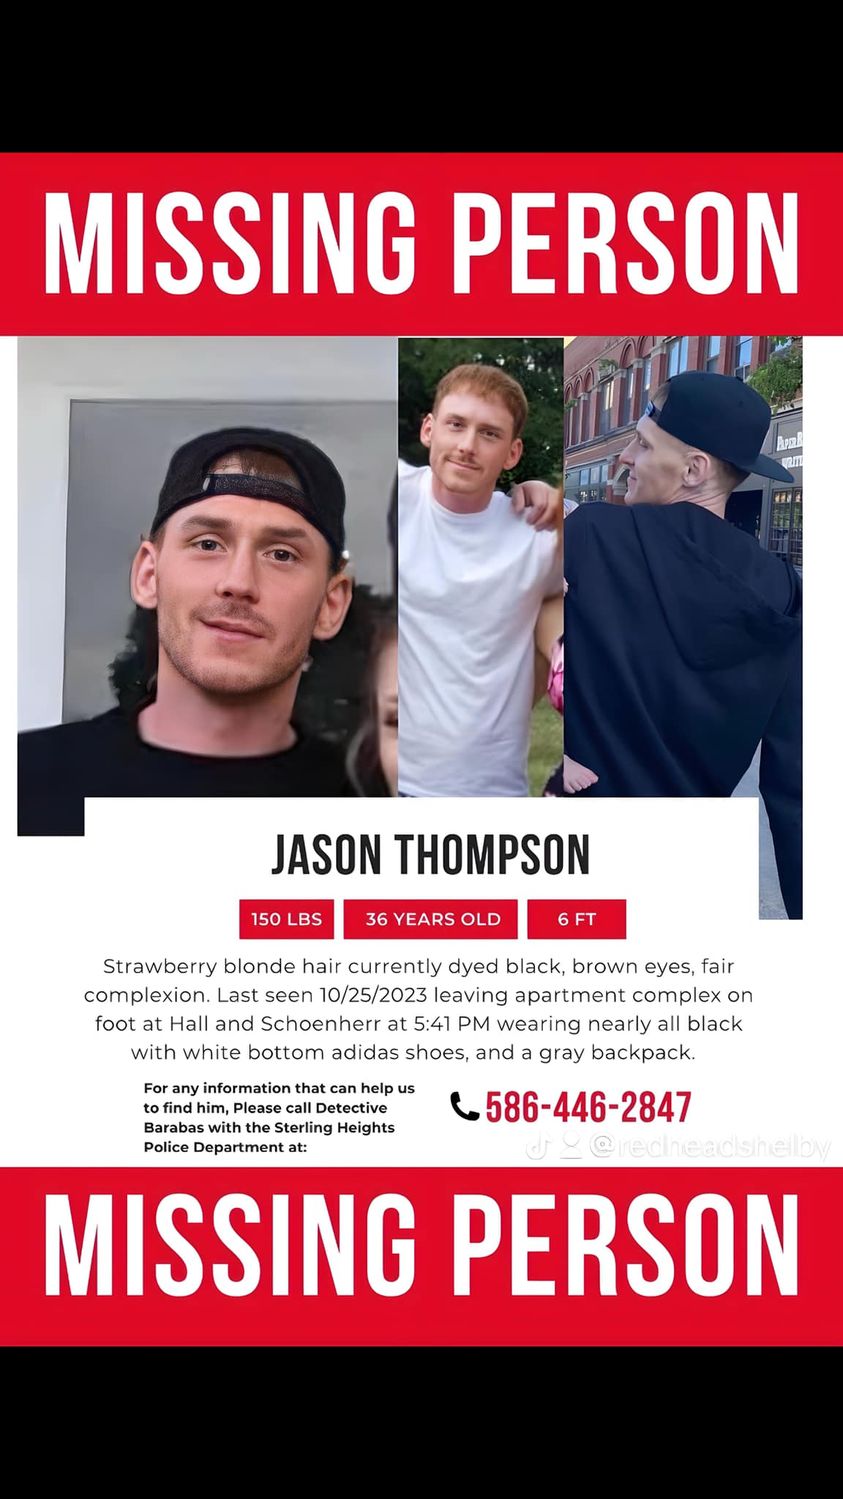 Missing poster created by Thompson’s sister